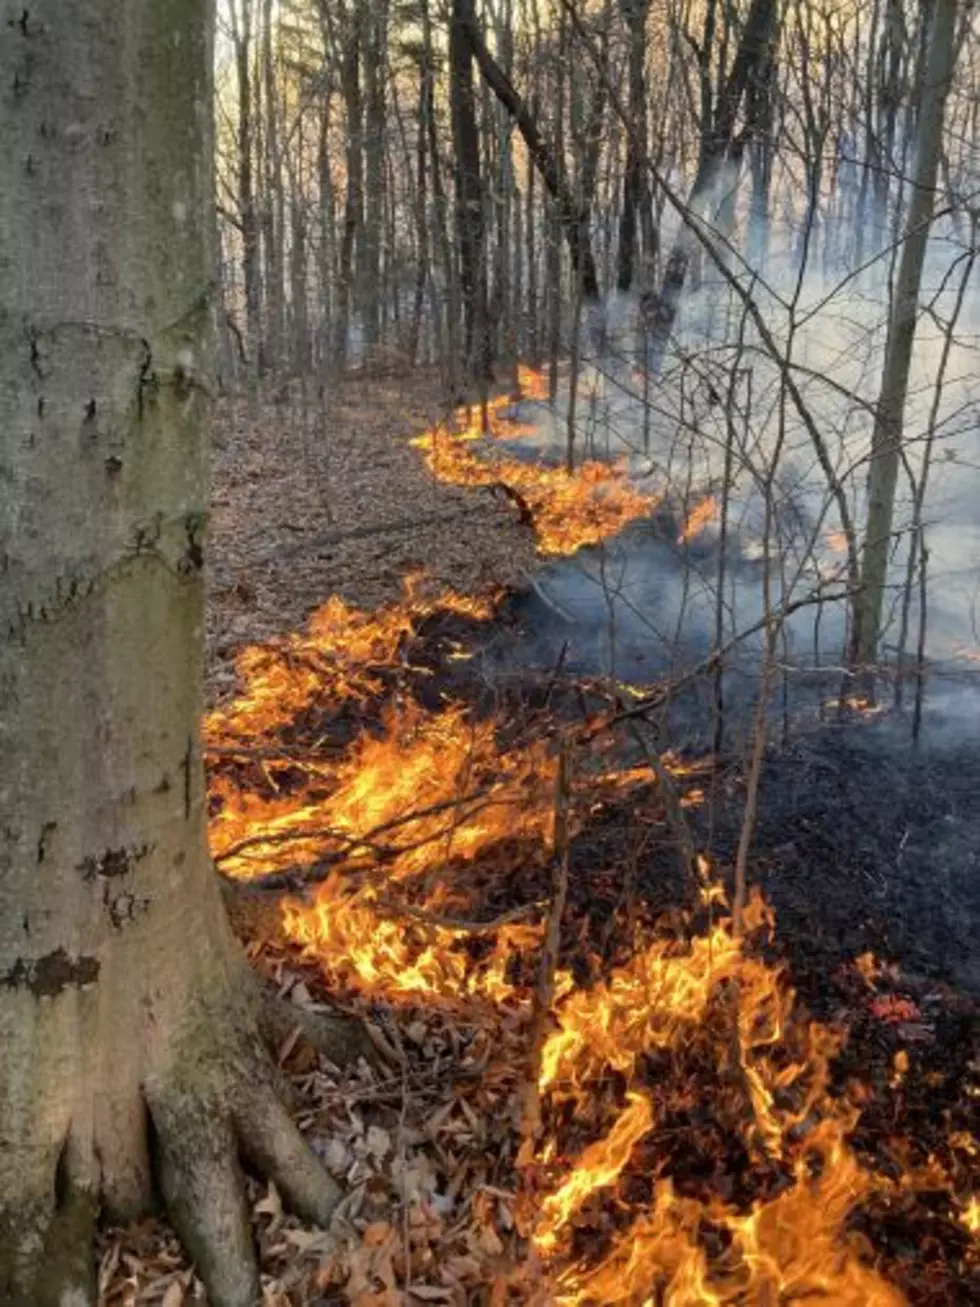 8 Wild Fires Reported Across Hudson Valley, New York State